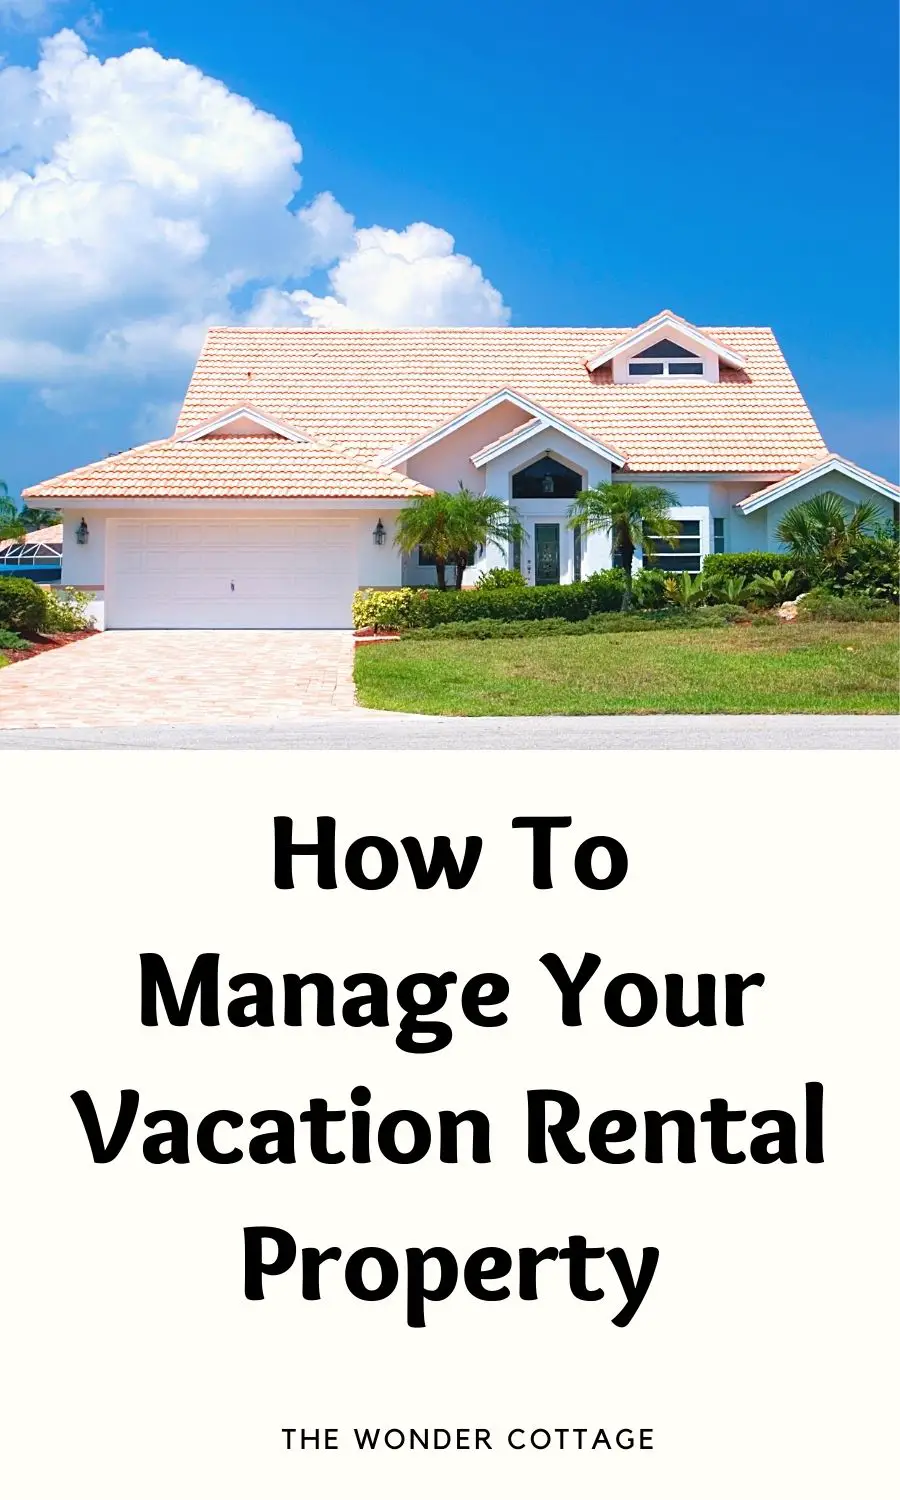 How To Manage Your Vacation Rental Property